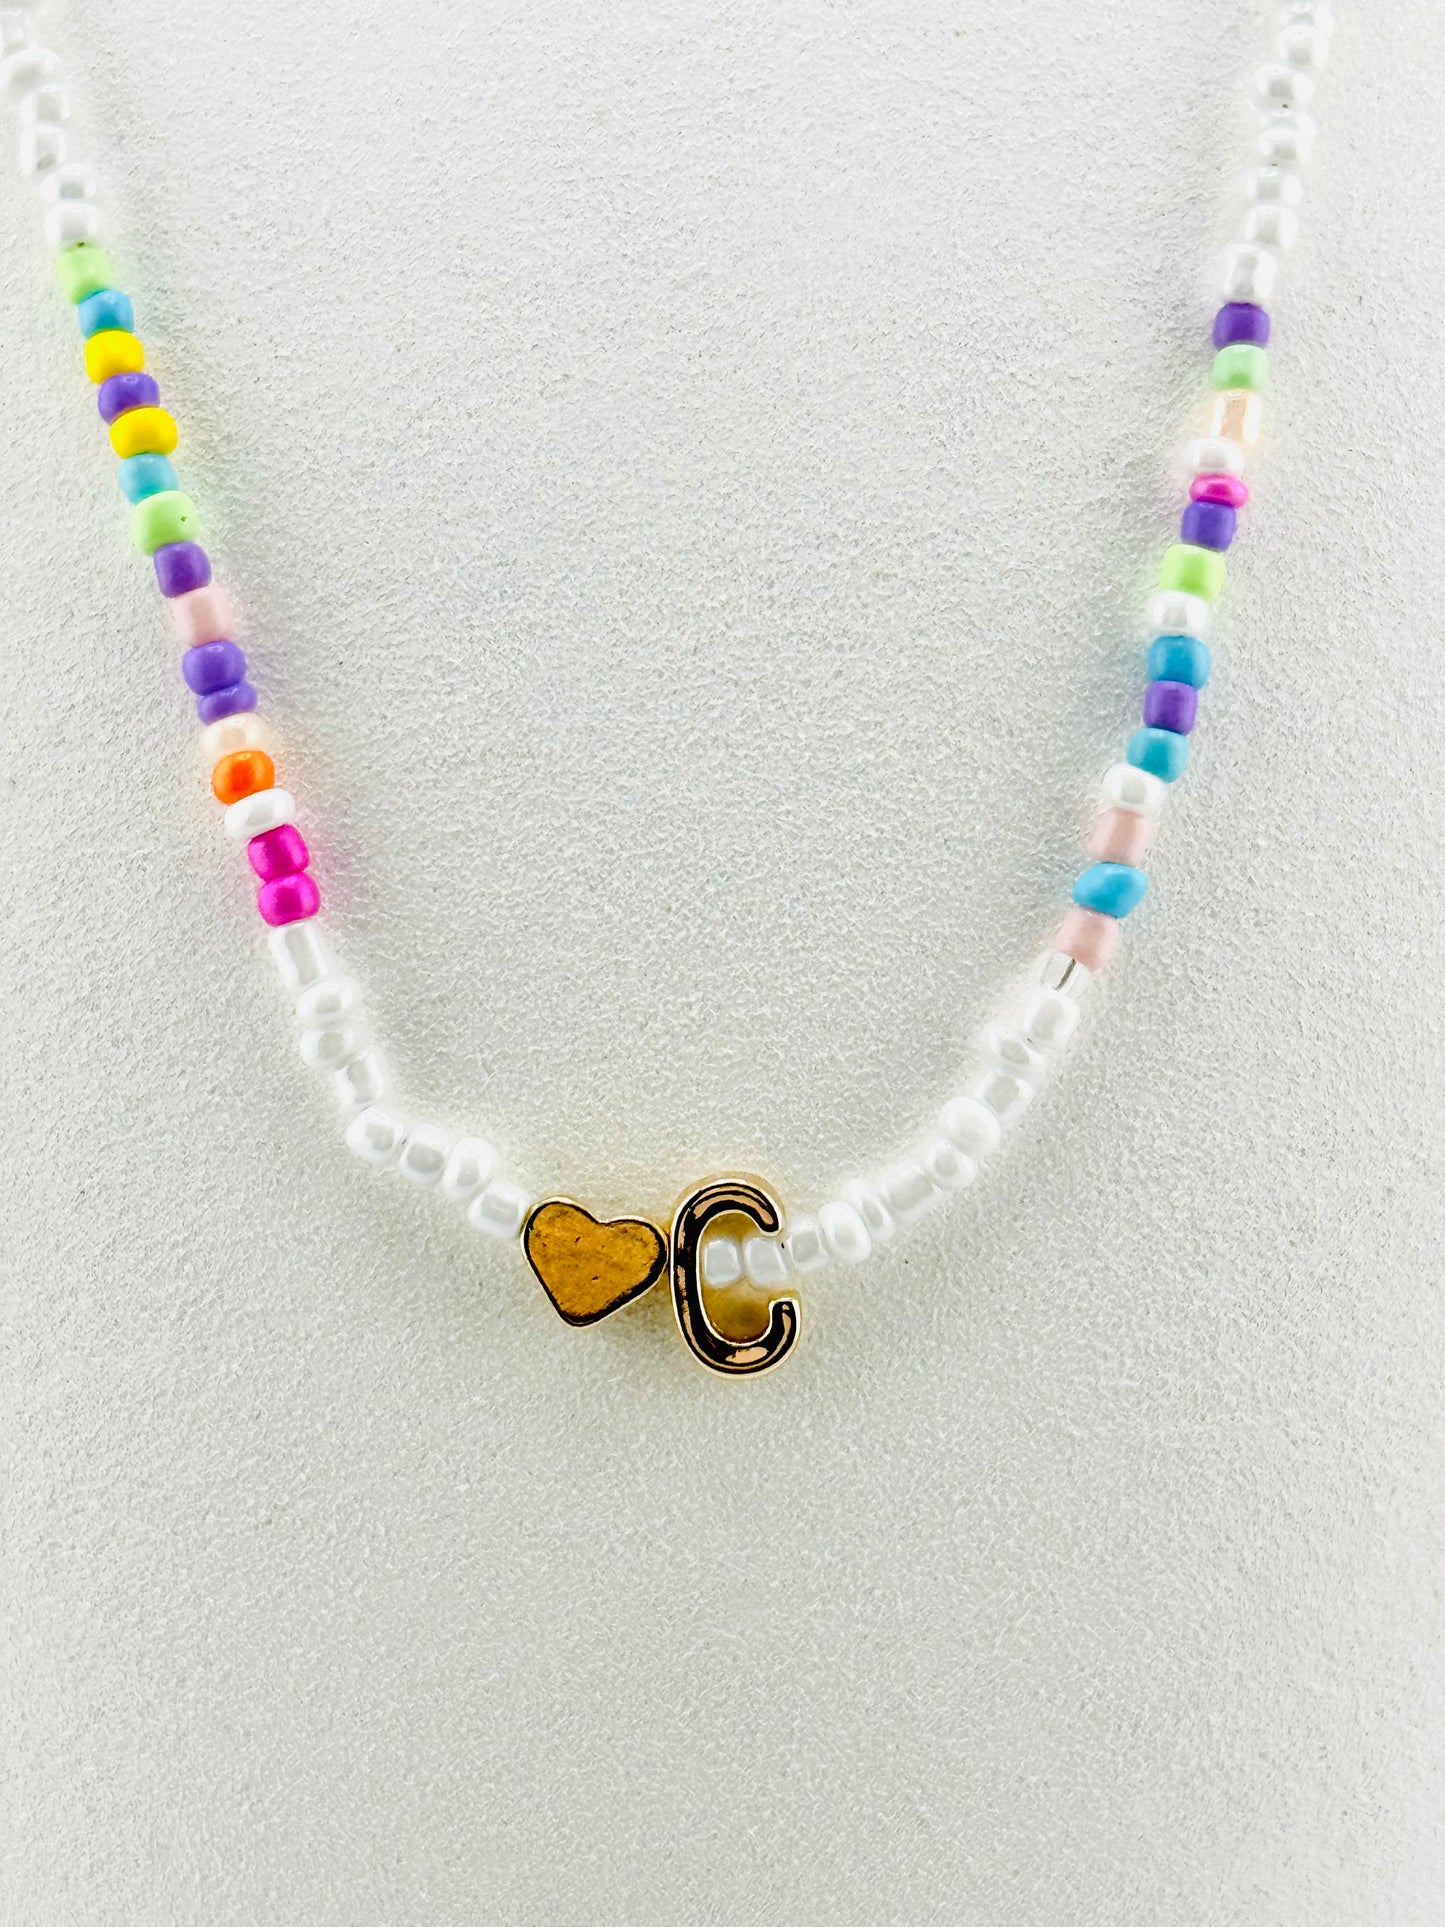 C beaded Initial necklace in white and pastel colors